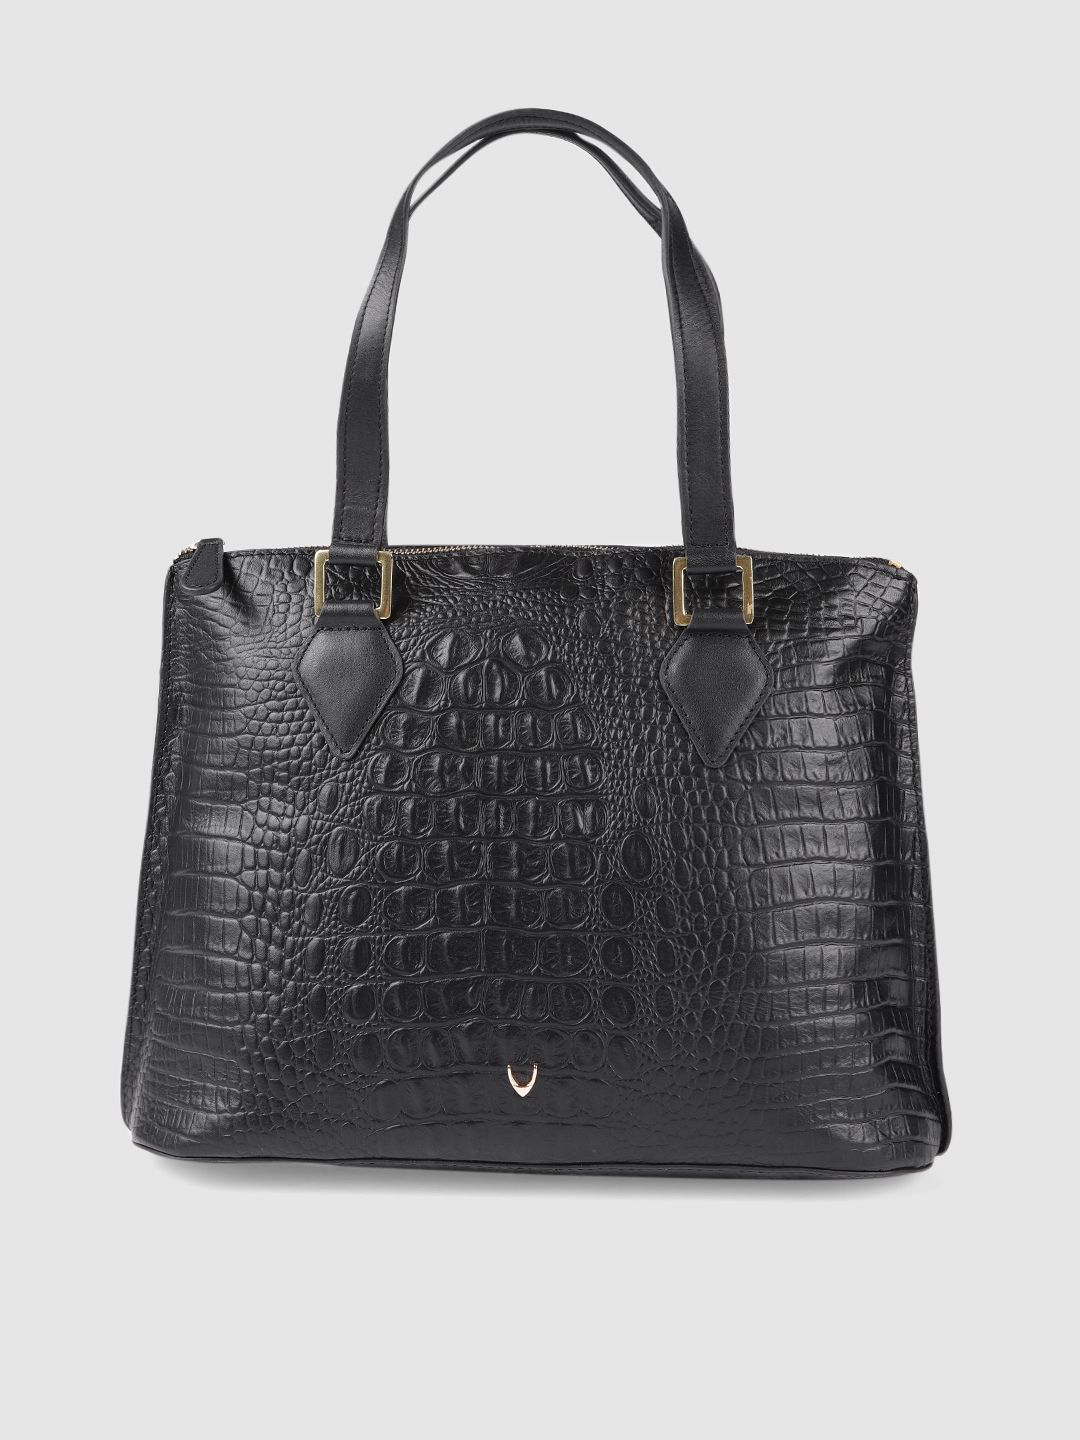 Hidesign Black Animal Textured Leather Structured Shoulder Bag Price in India